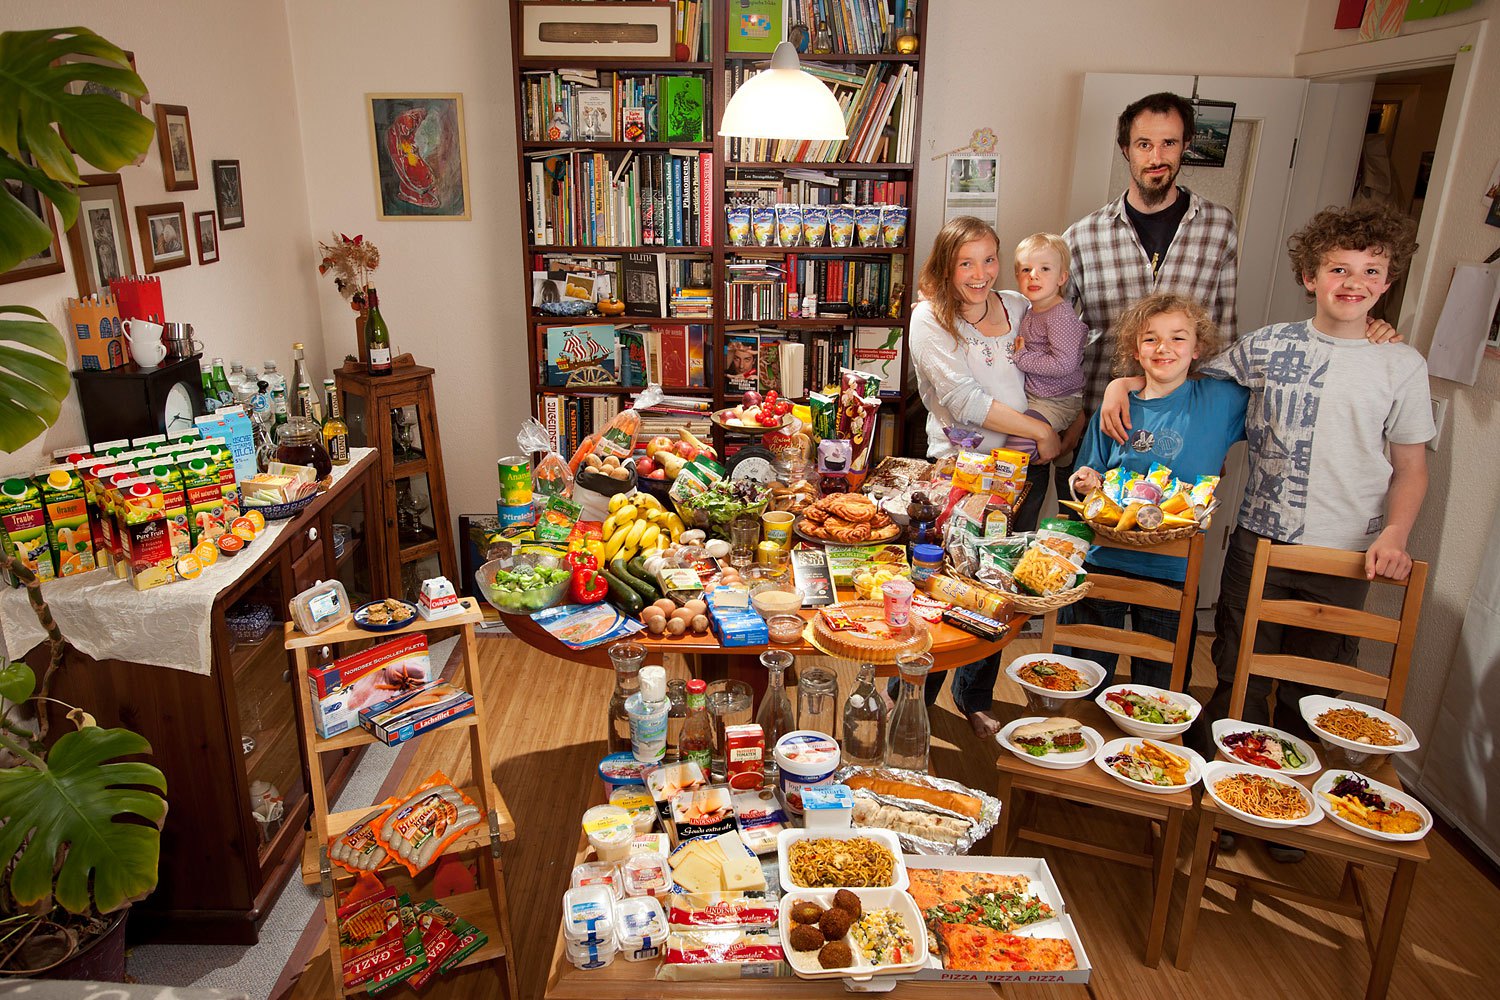 Germany: The Sturm Family of Hamburg. Food Expenditure for One Week: € 253.29 ($325.81 USD). Favorite foods: salads, shrimp, buttered vegetables, sweet rice with cinnamon and sugar, pasta.